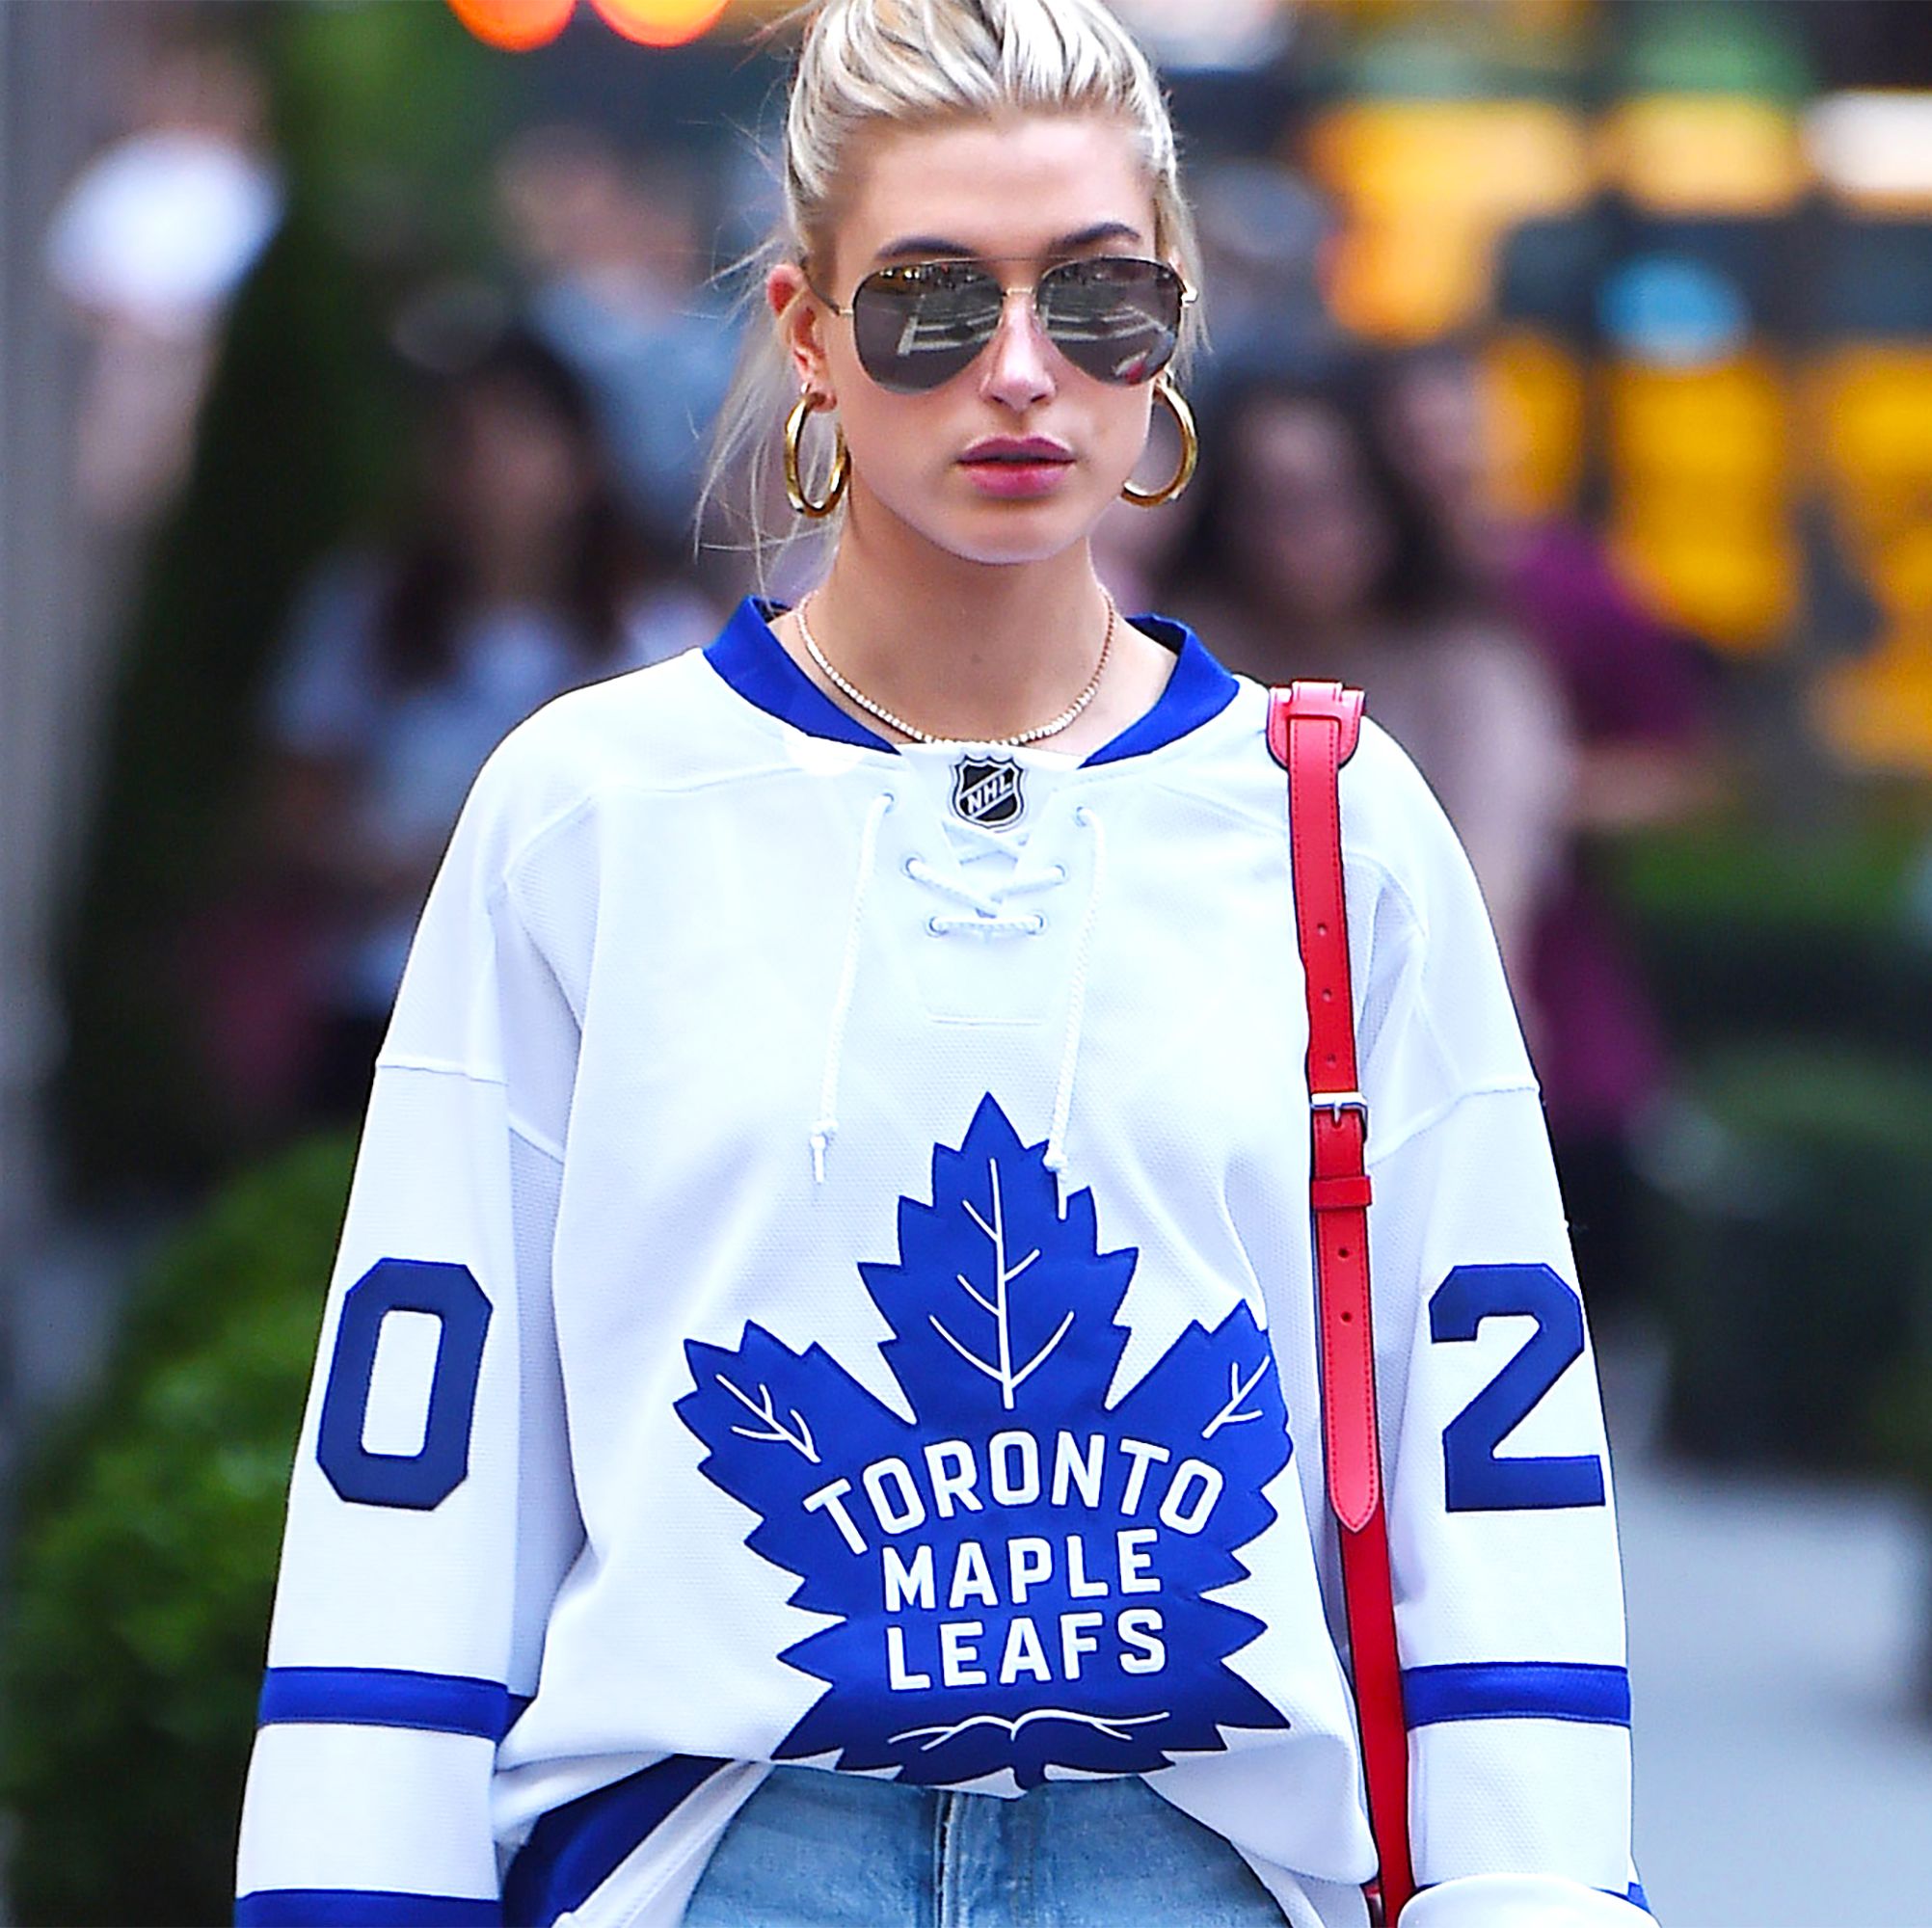 how to style a jersey